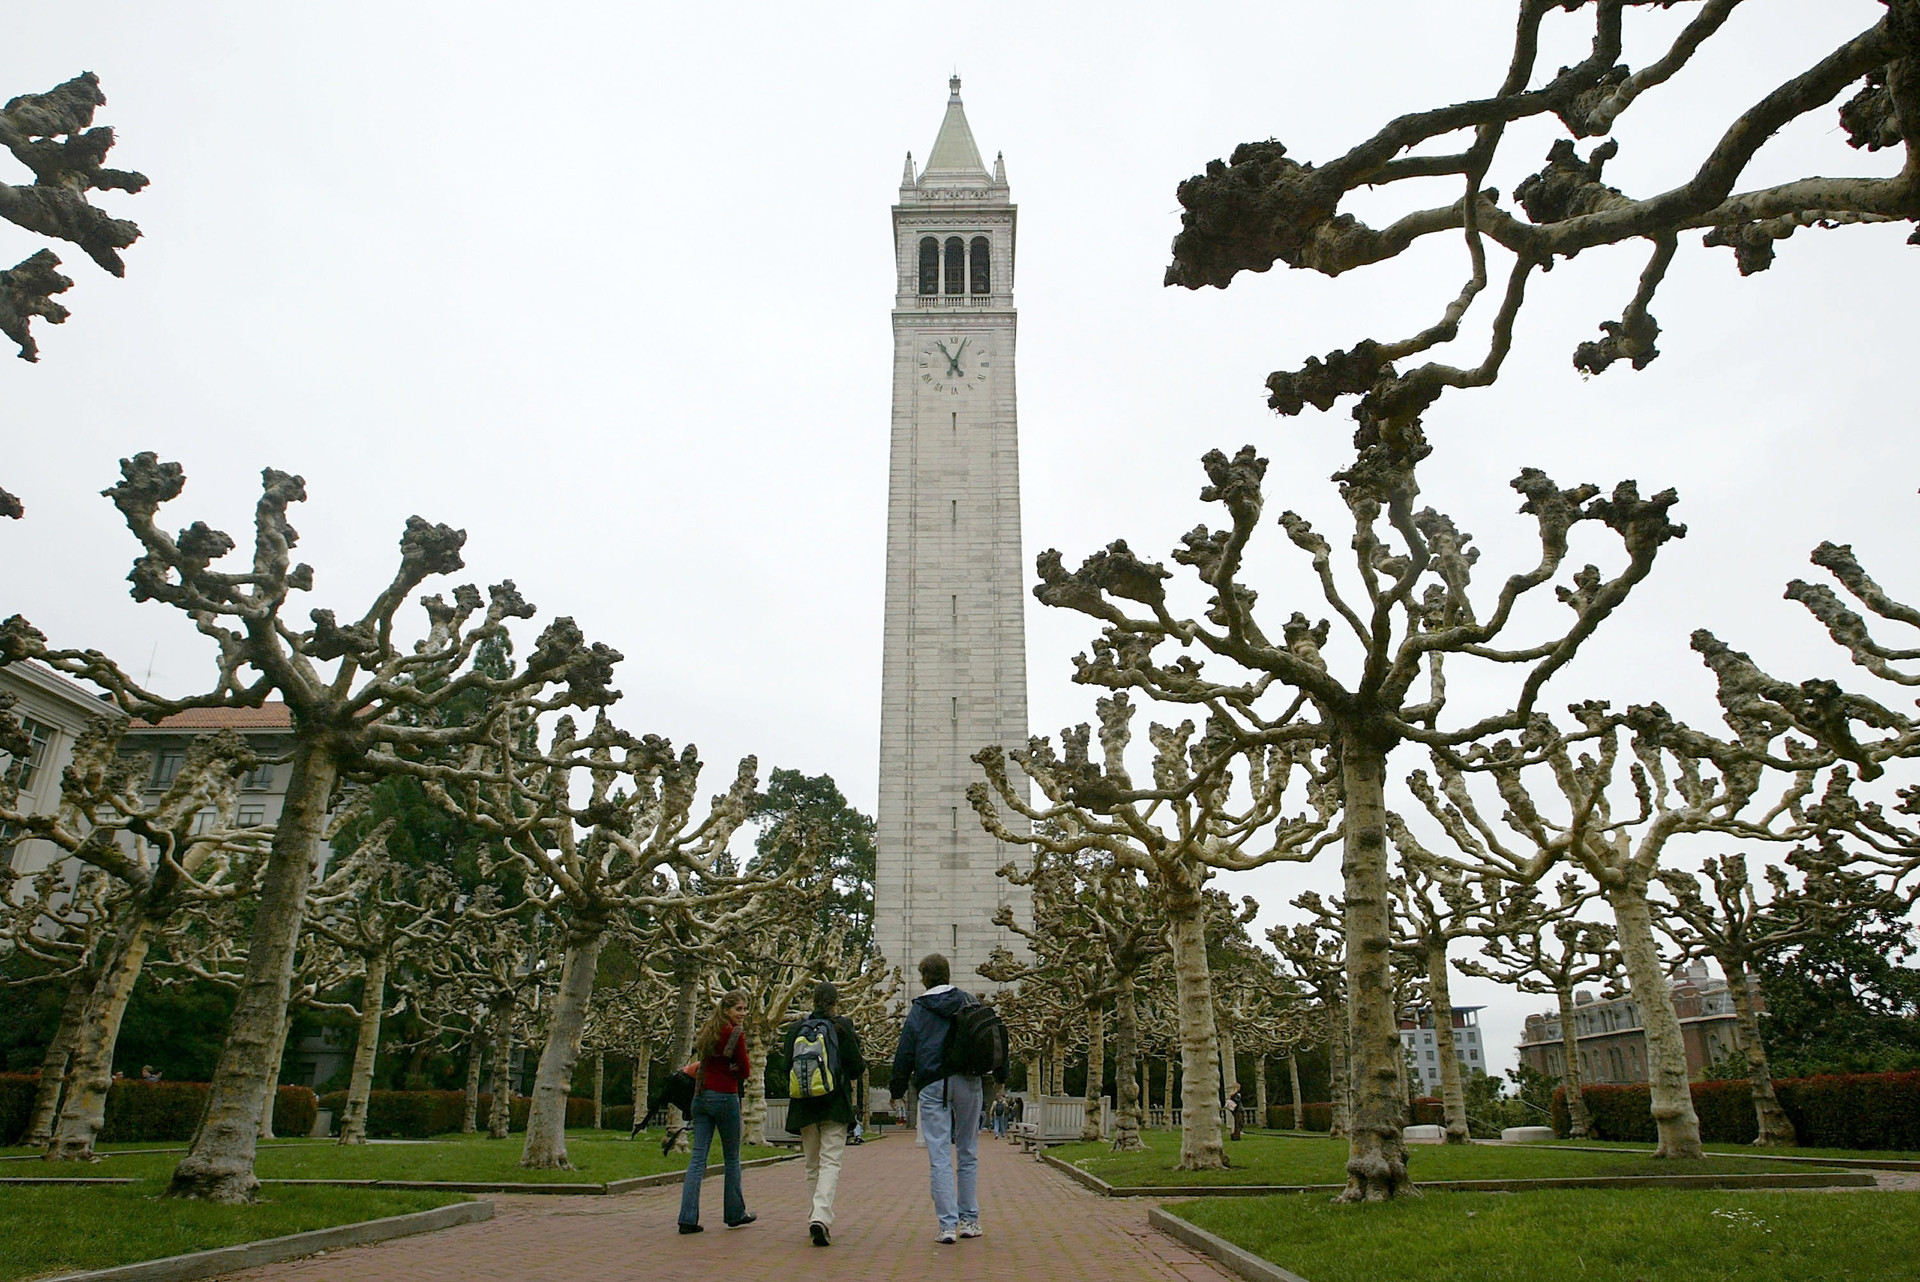 A tall, white clock tower punctuates the middle of a college campus outdoor space. Sections of grass and chunky trees are scattered throughout. The sky is gray. Three college students walk down a brick pathway together toward the clock tower. They wear book bags and jackets.